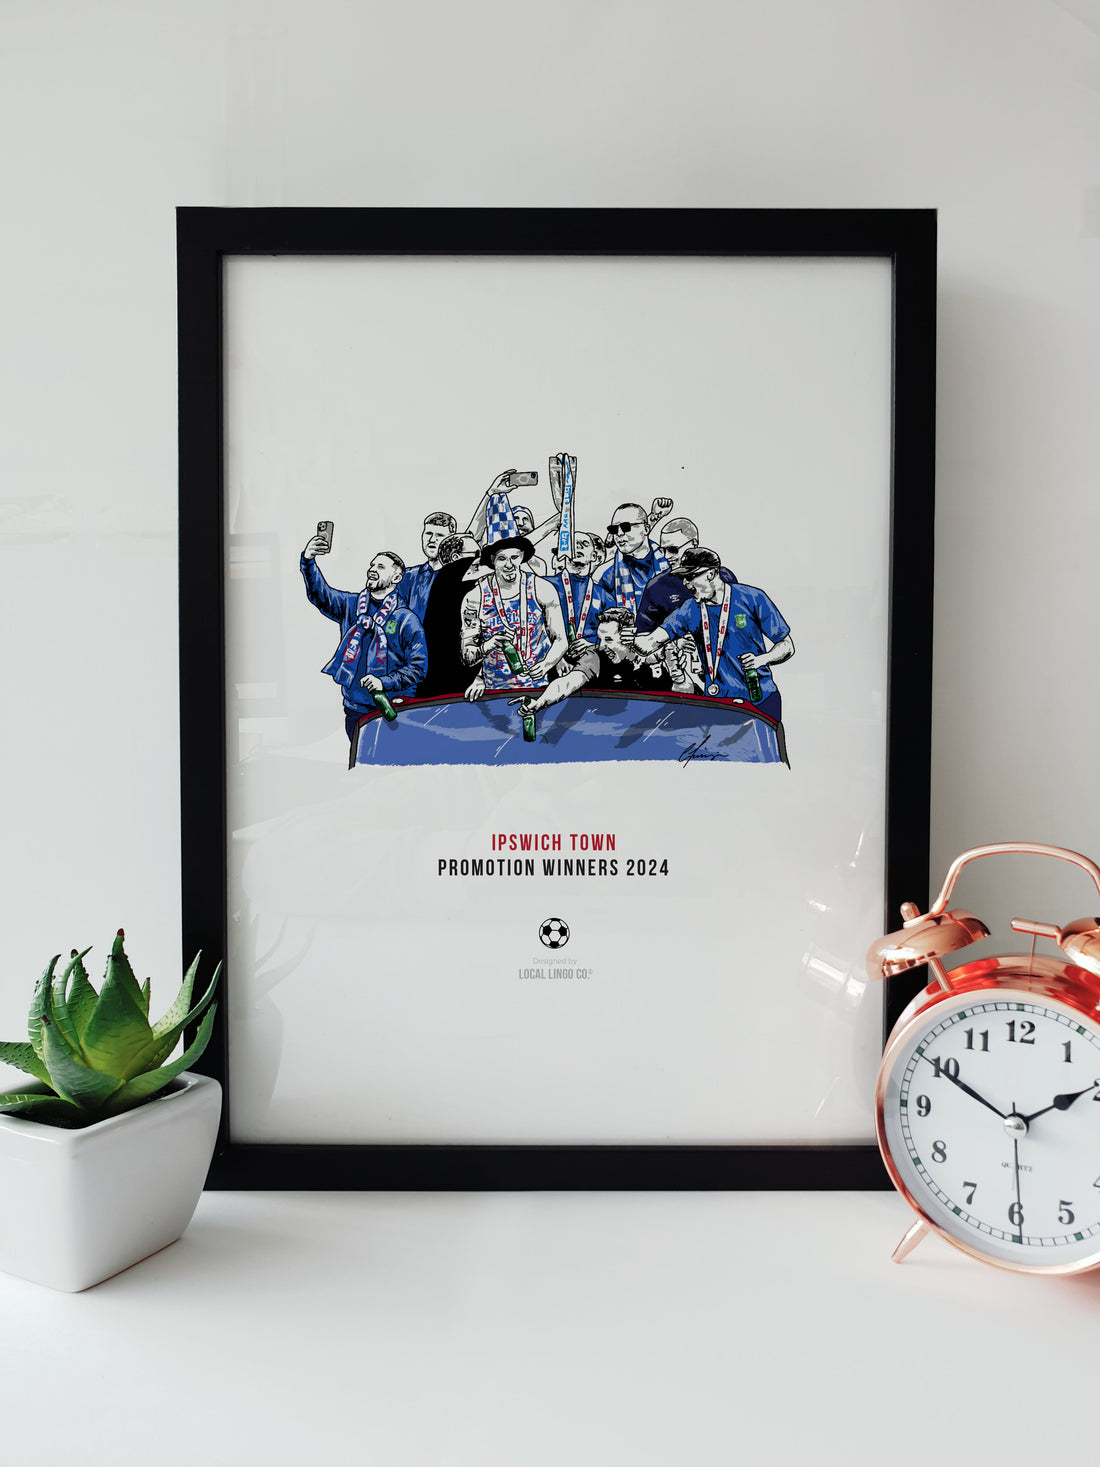 Art print of Ipswich Town Football Club's 2024 promotion celebration on a team bus, featuring players and staff jubilantly holding a trophy, designed by Local Lingo.